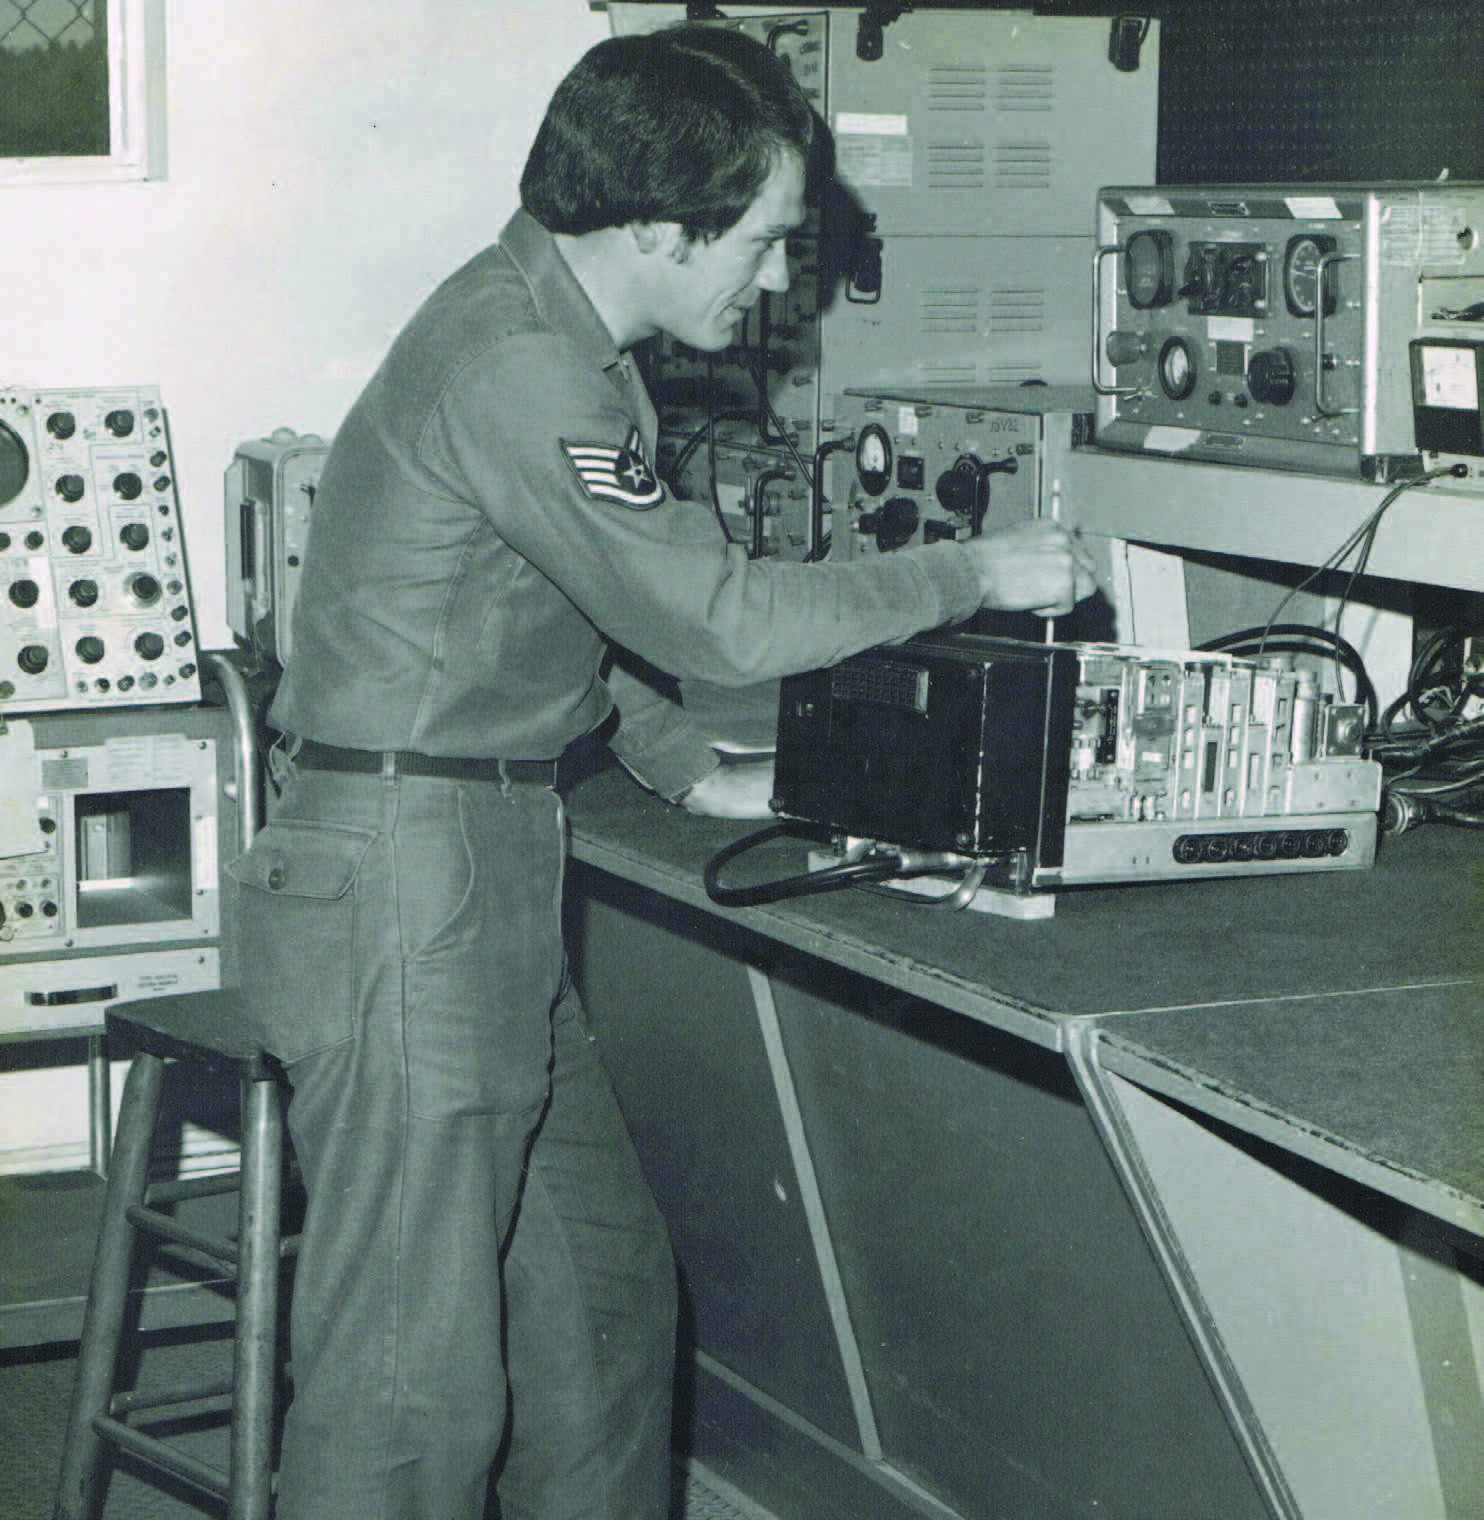 Pat Geer repairs avionics equipment while serving in the Florida Air National Guard in the 1970s